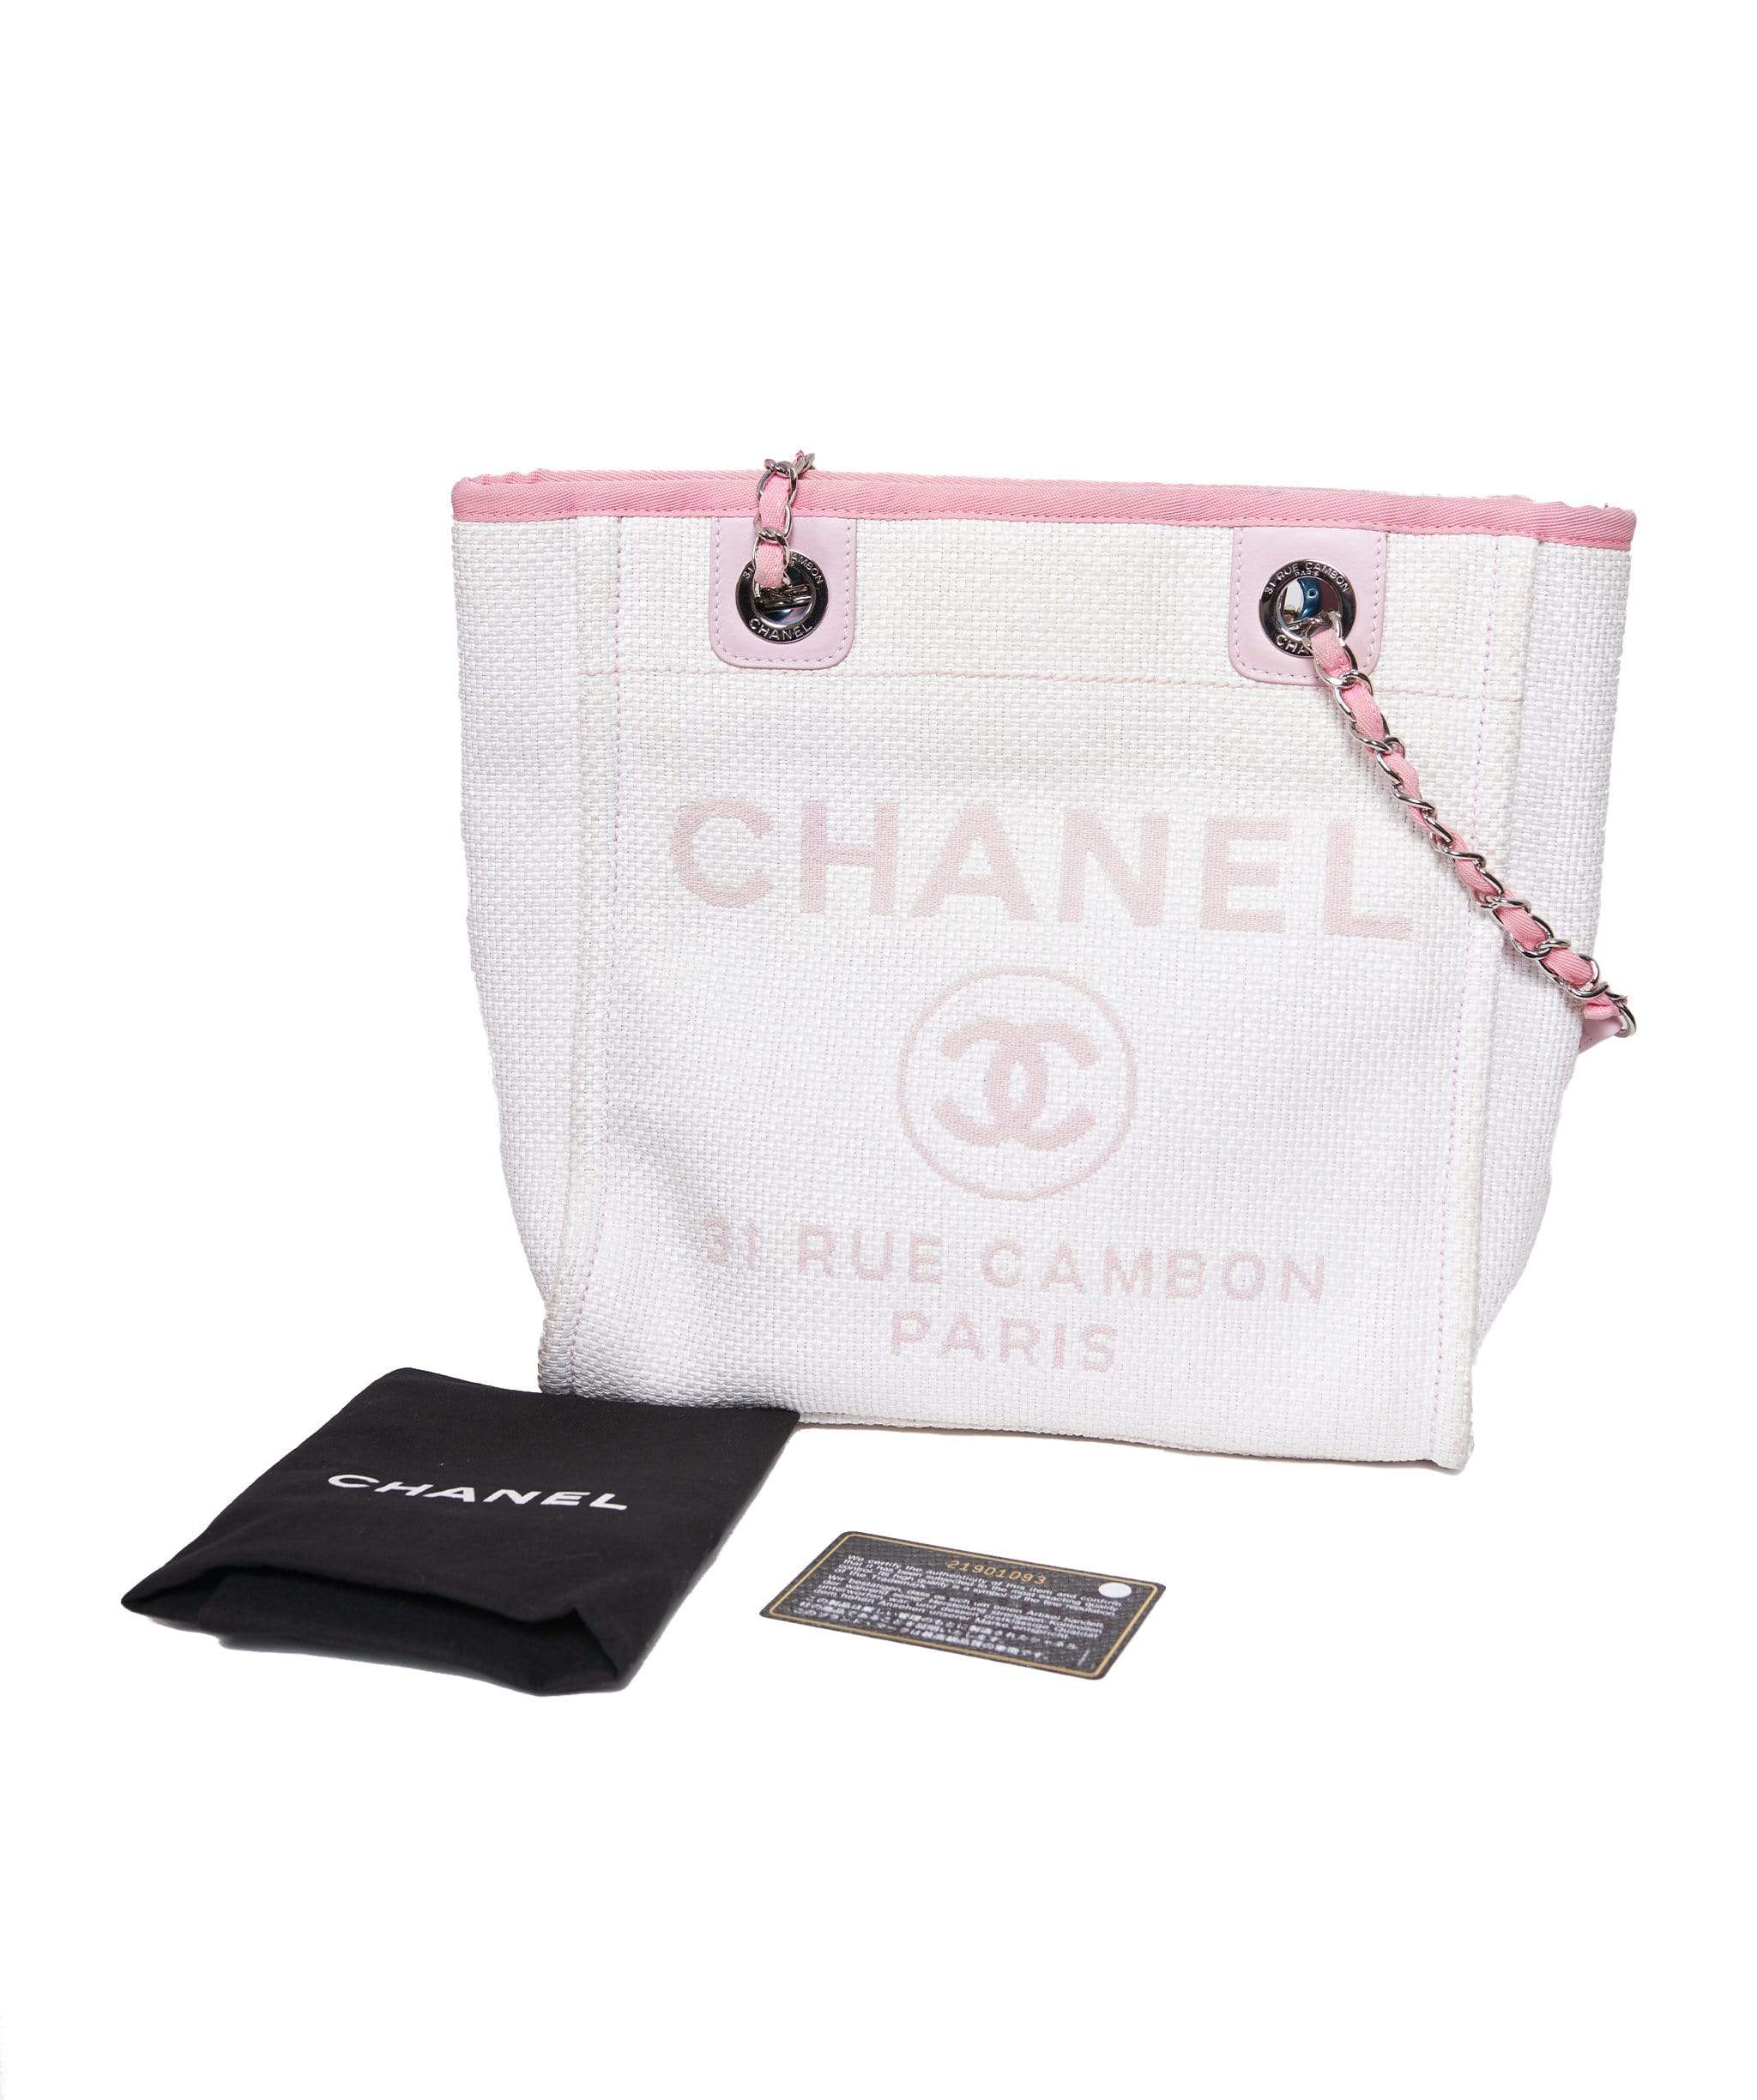 Chanel Chanel Pink Small Deauville Tote Bag MW2441